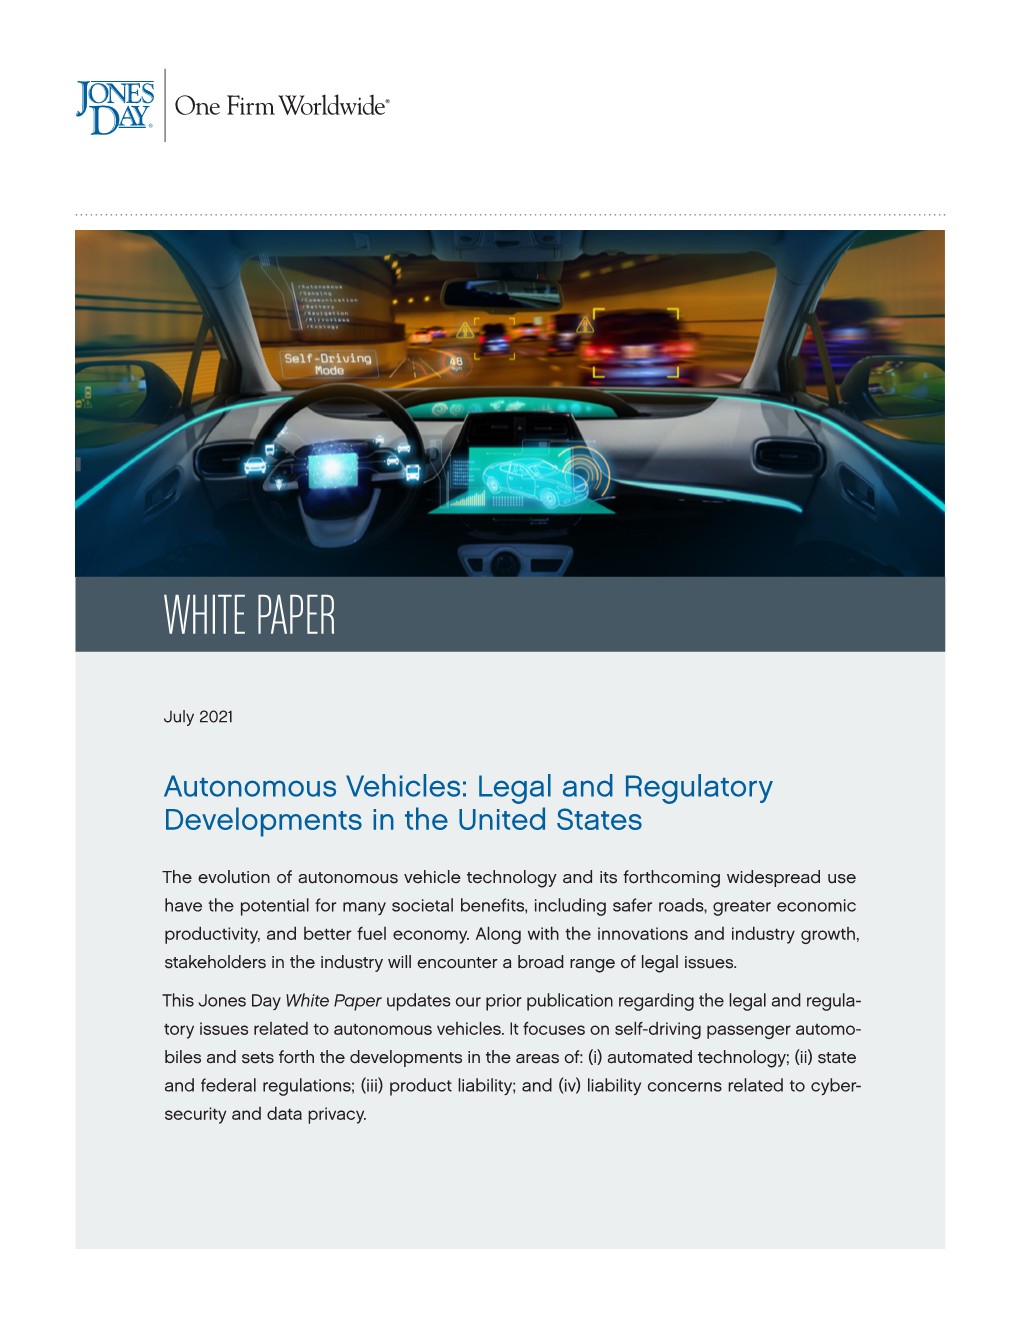 Autonomous Vehicles: Legal and Regulatory Developments in the United States